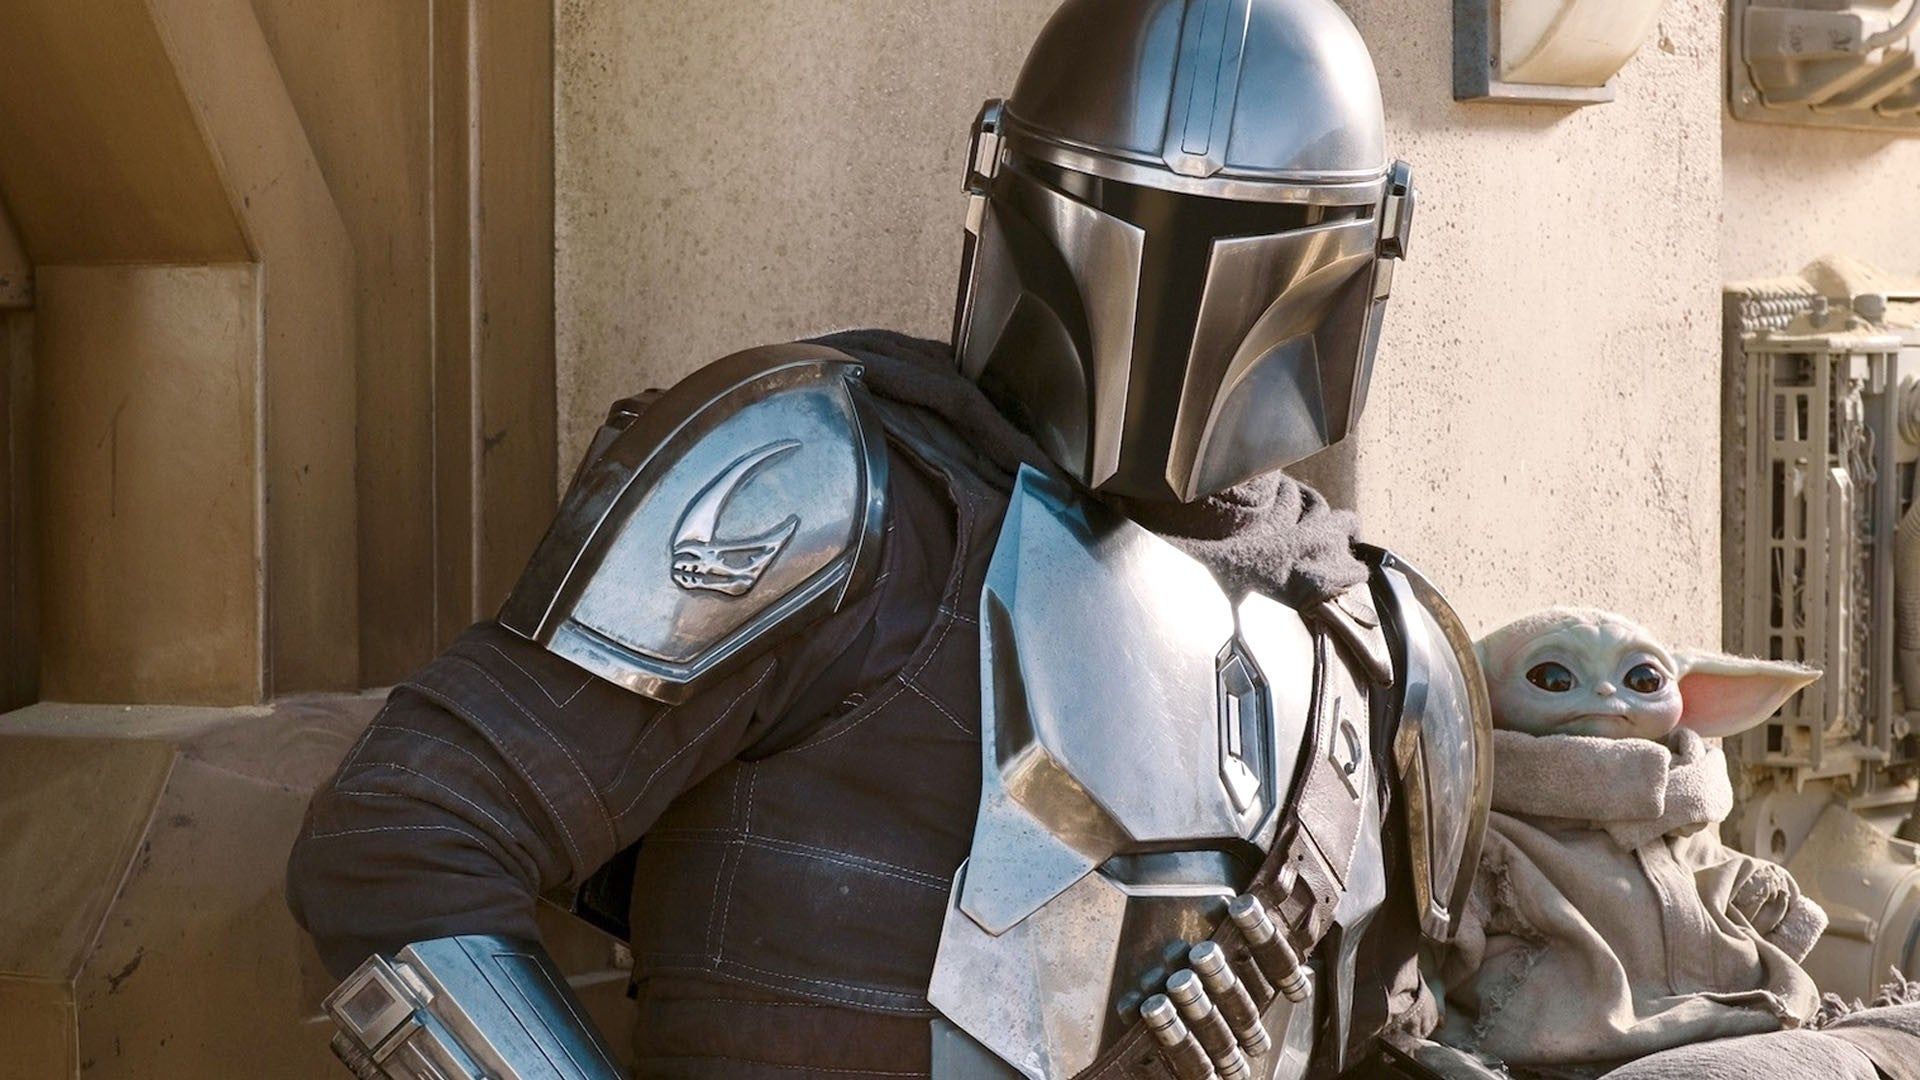 The Mandalorian' Season 2: What We Know About That Episode 1 Surprise